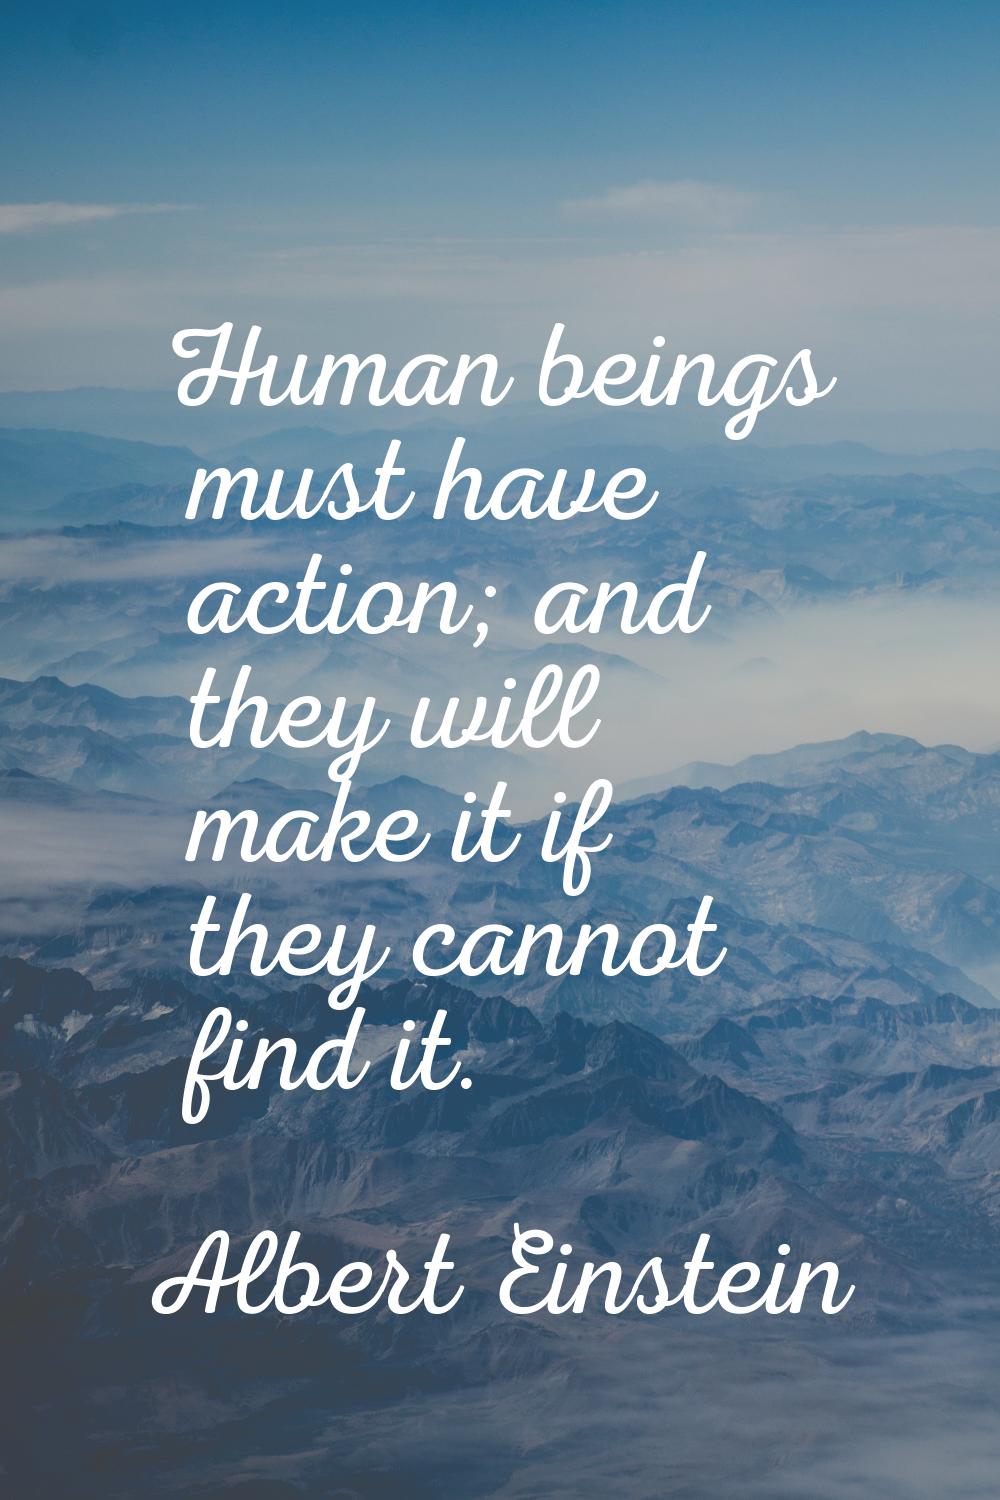 Human beings must have action; and they will make it if they cannot find it.